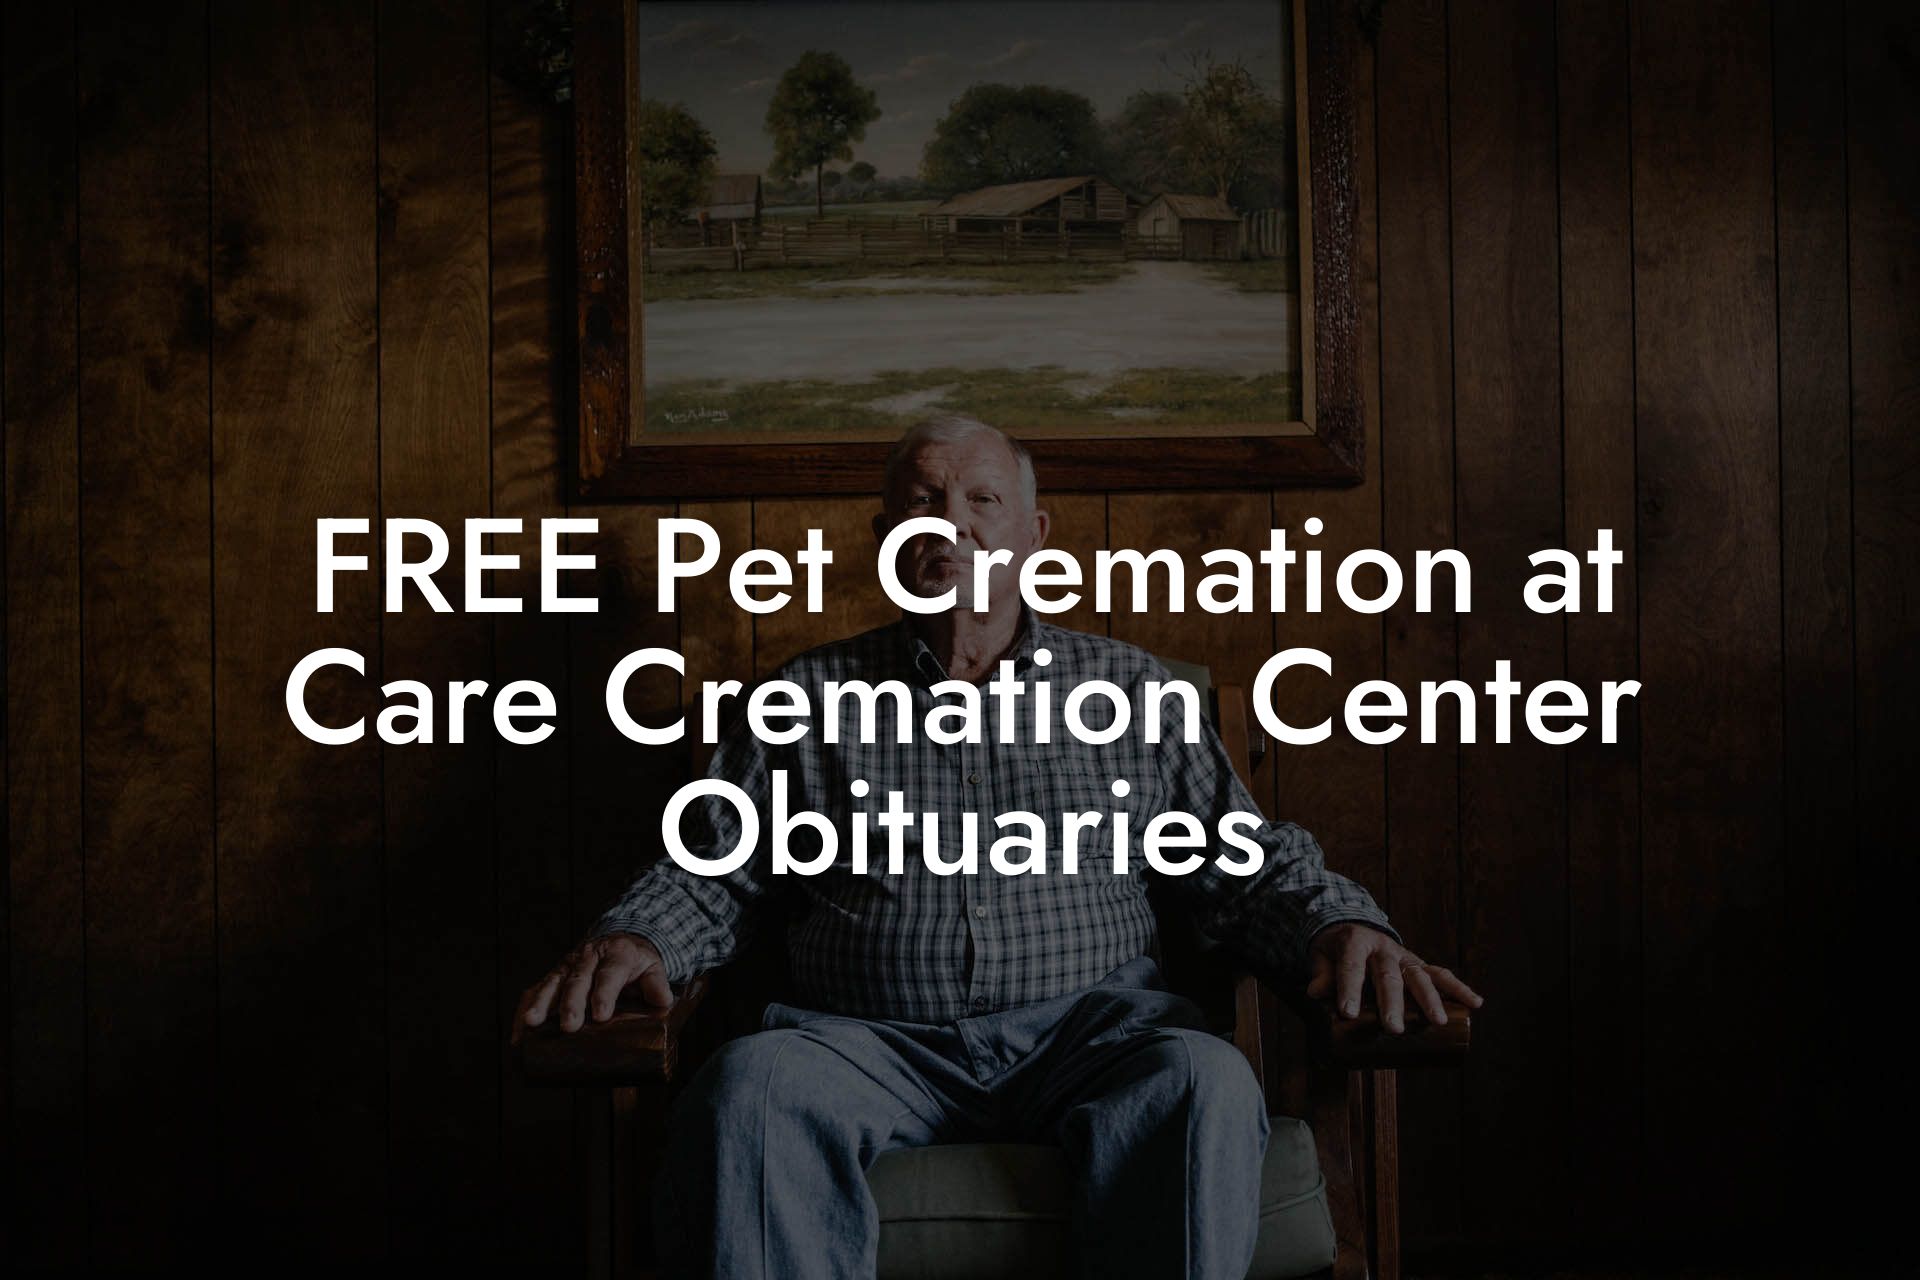 FREE Pet Cremation at Care Cremation Center Obituaries